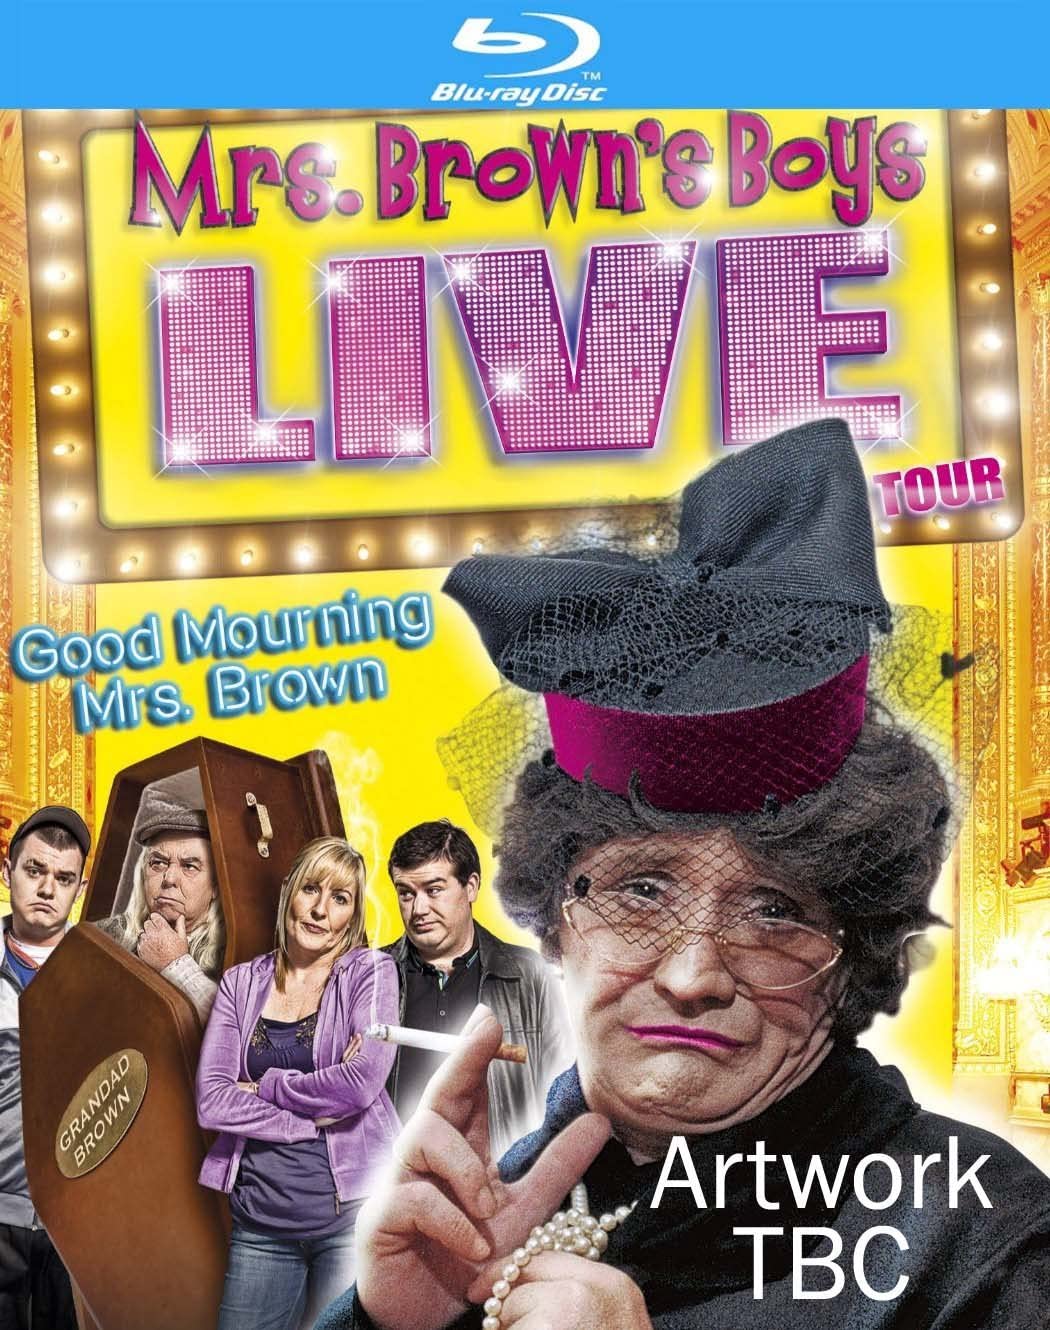 Mrs. Brown's Boys Live Tour: Good Mourning Mrs. Brown [Blu-ray]